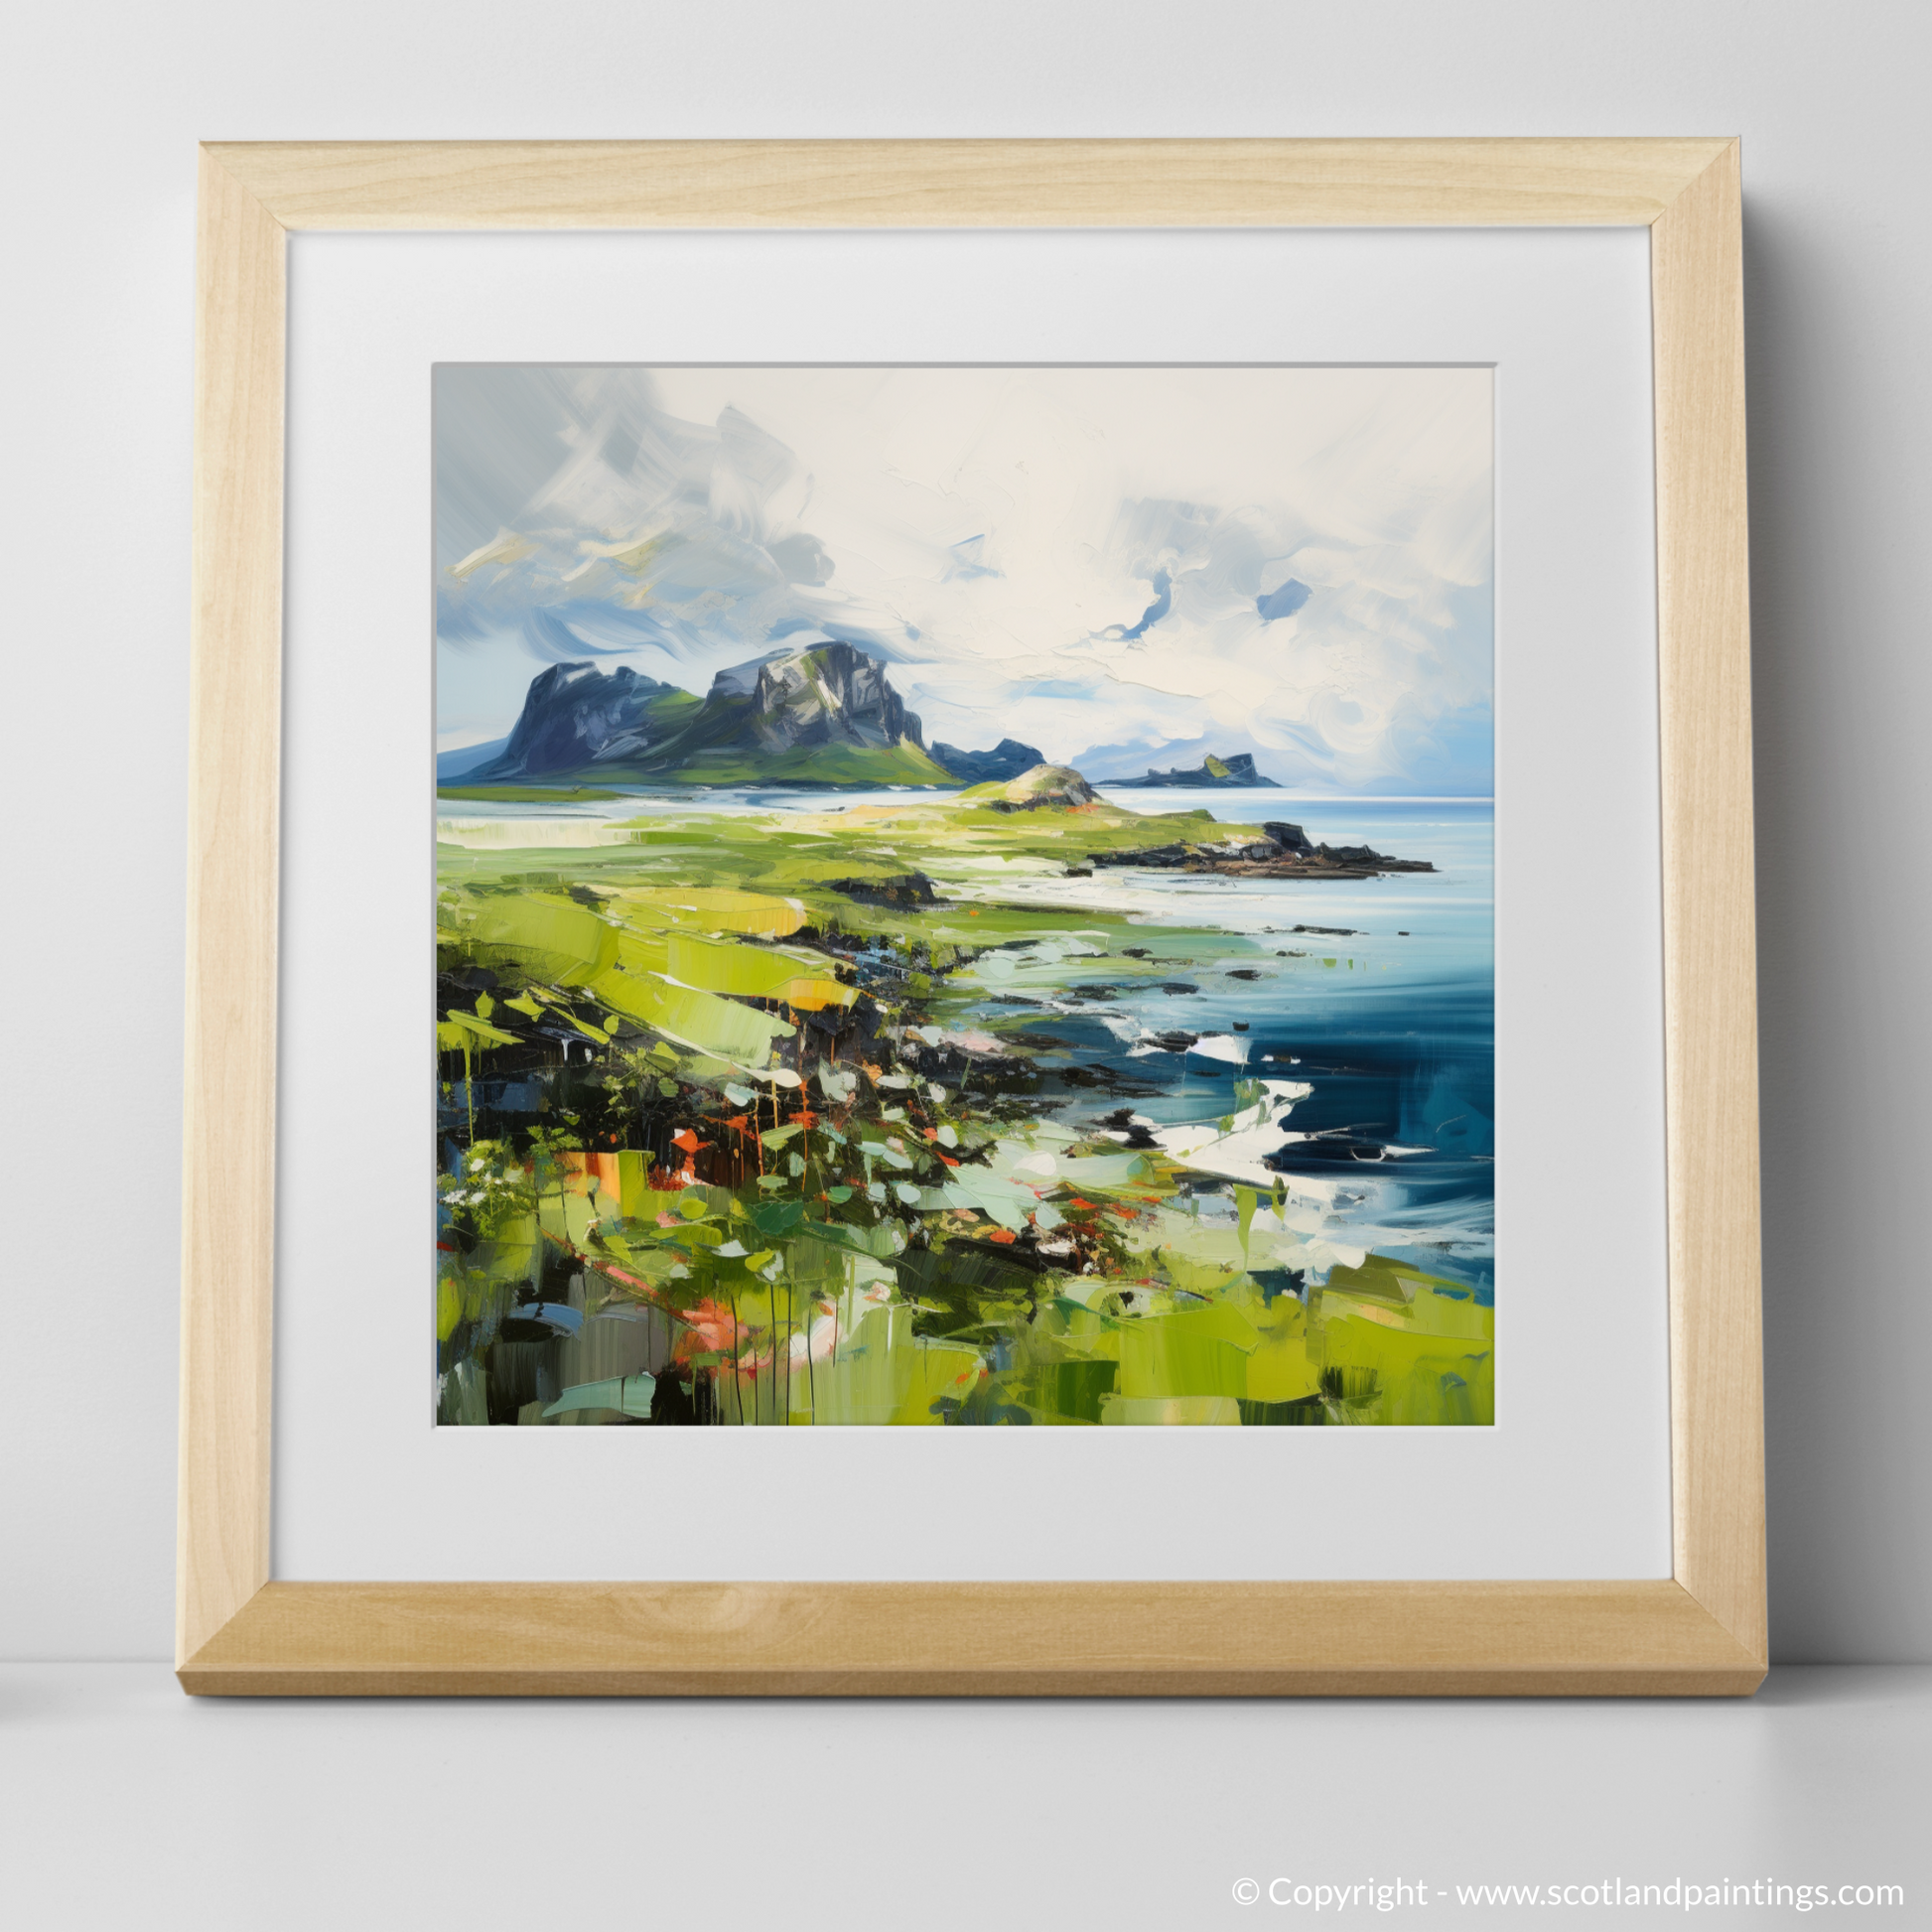 Art Print of Isle of Eigg, Inner Hebrides with a natural frame